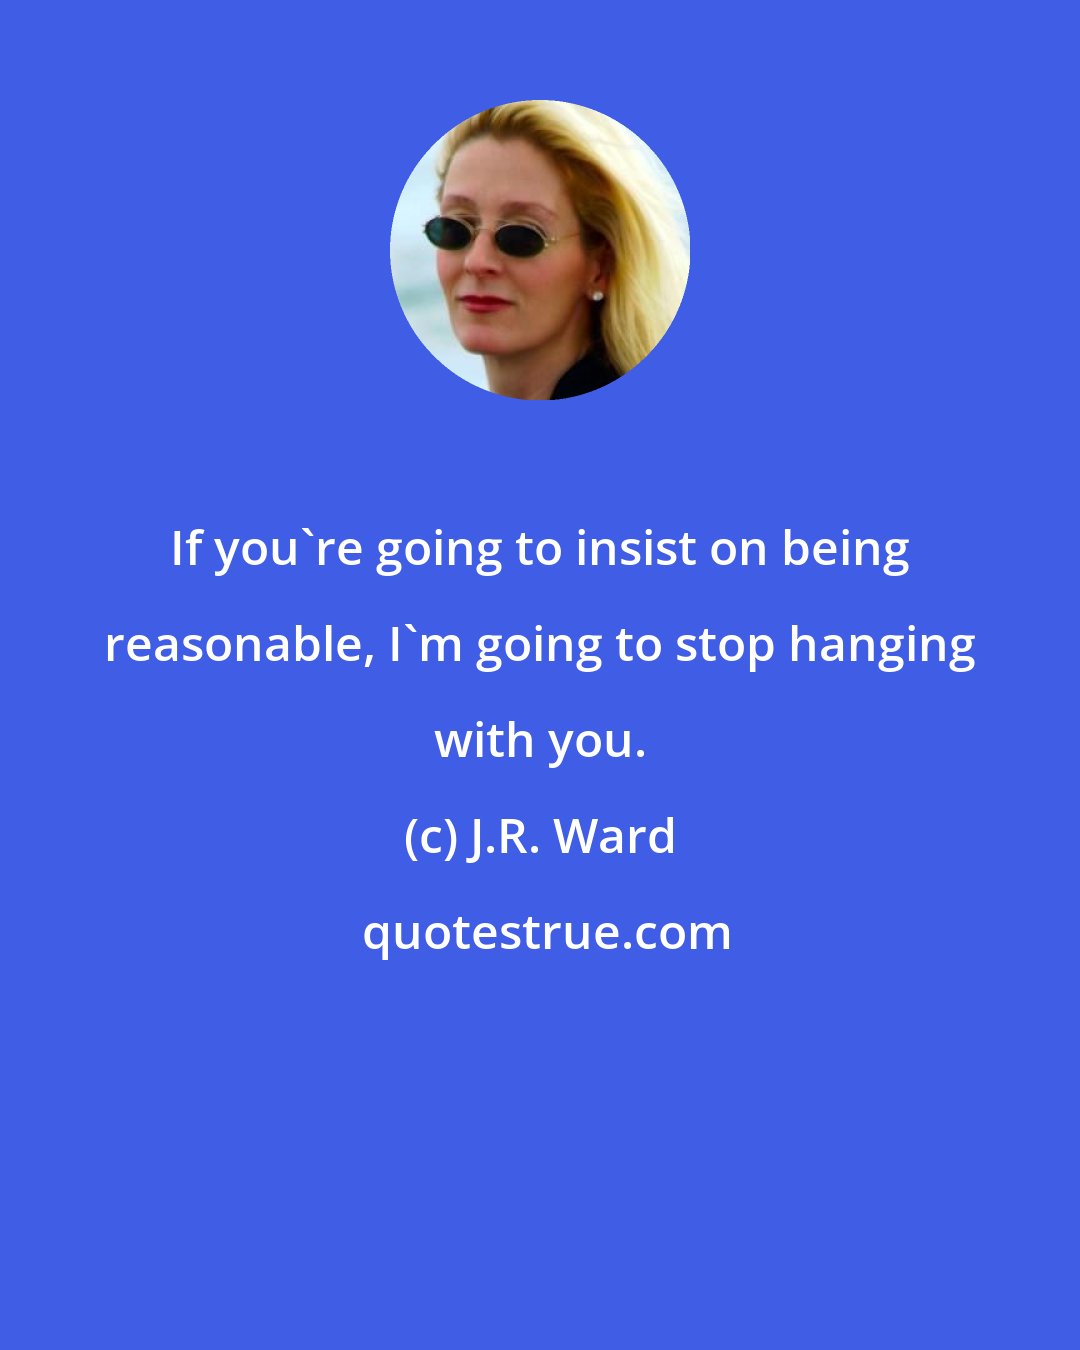 J.R. Ward: If you're going to insist on being reasonable, I'm going to stop hanging with you.